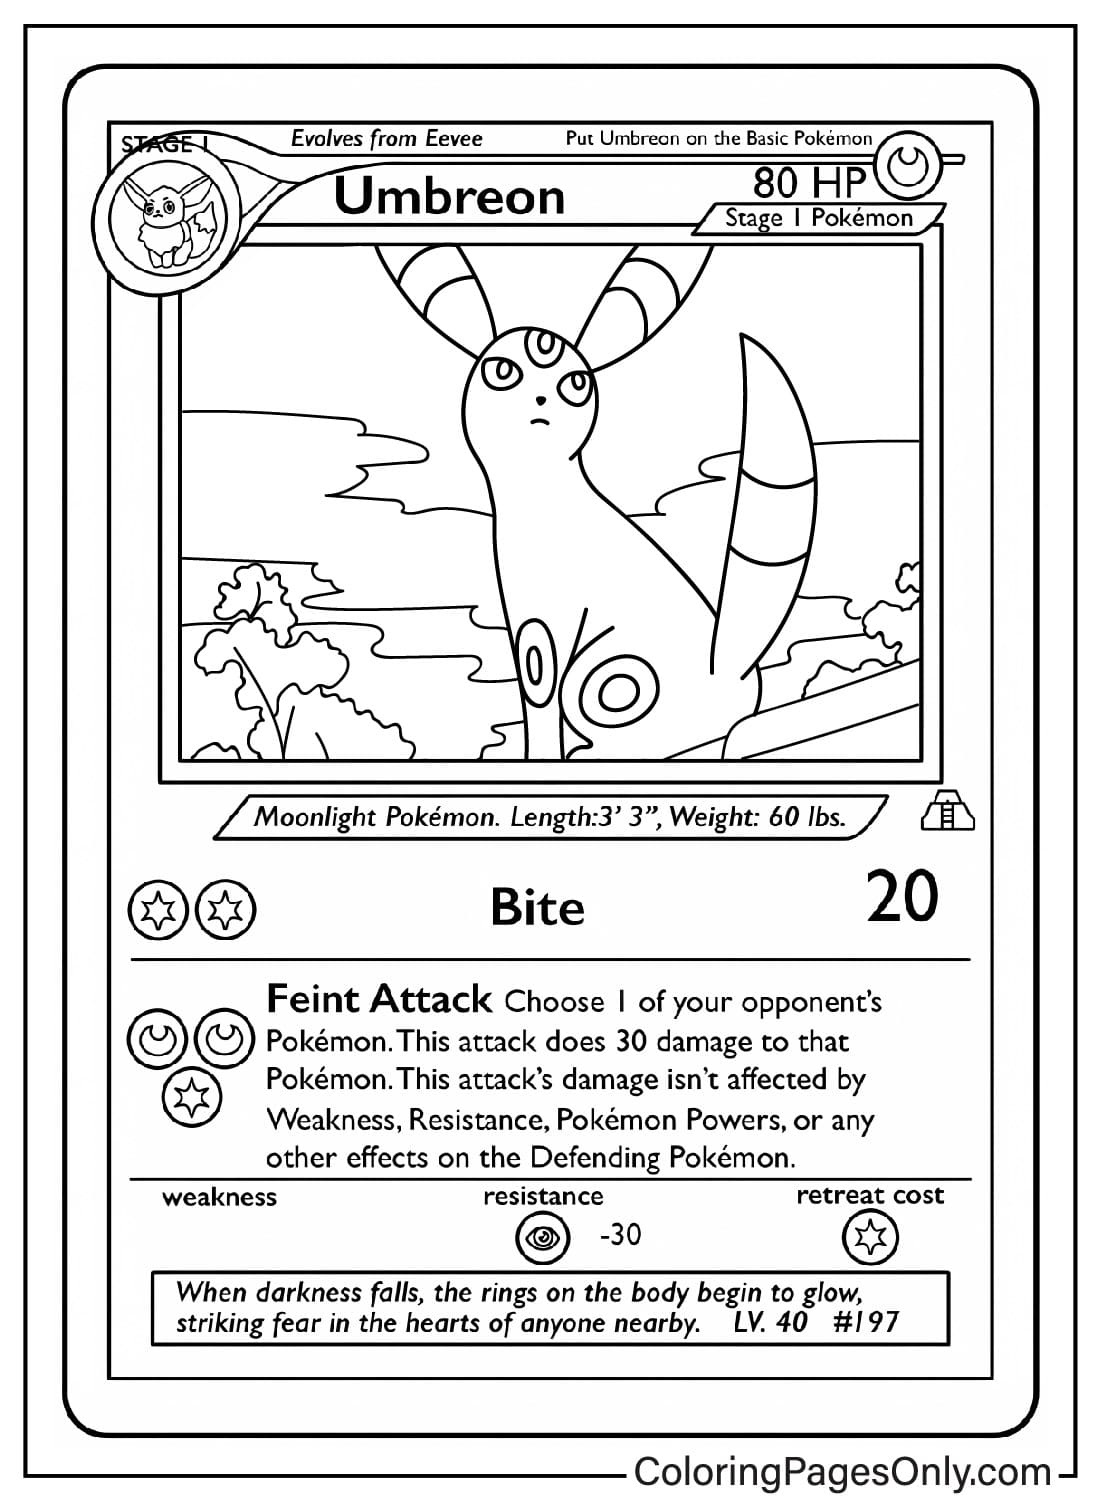 Umbreon Pokemon Card Coloring Sheet from Pokemon Card